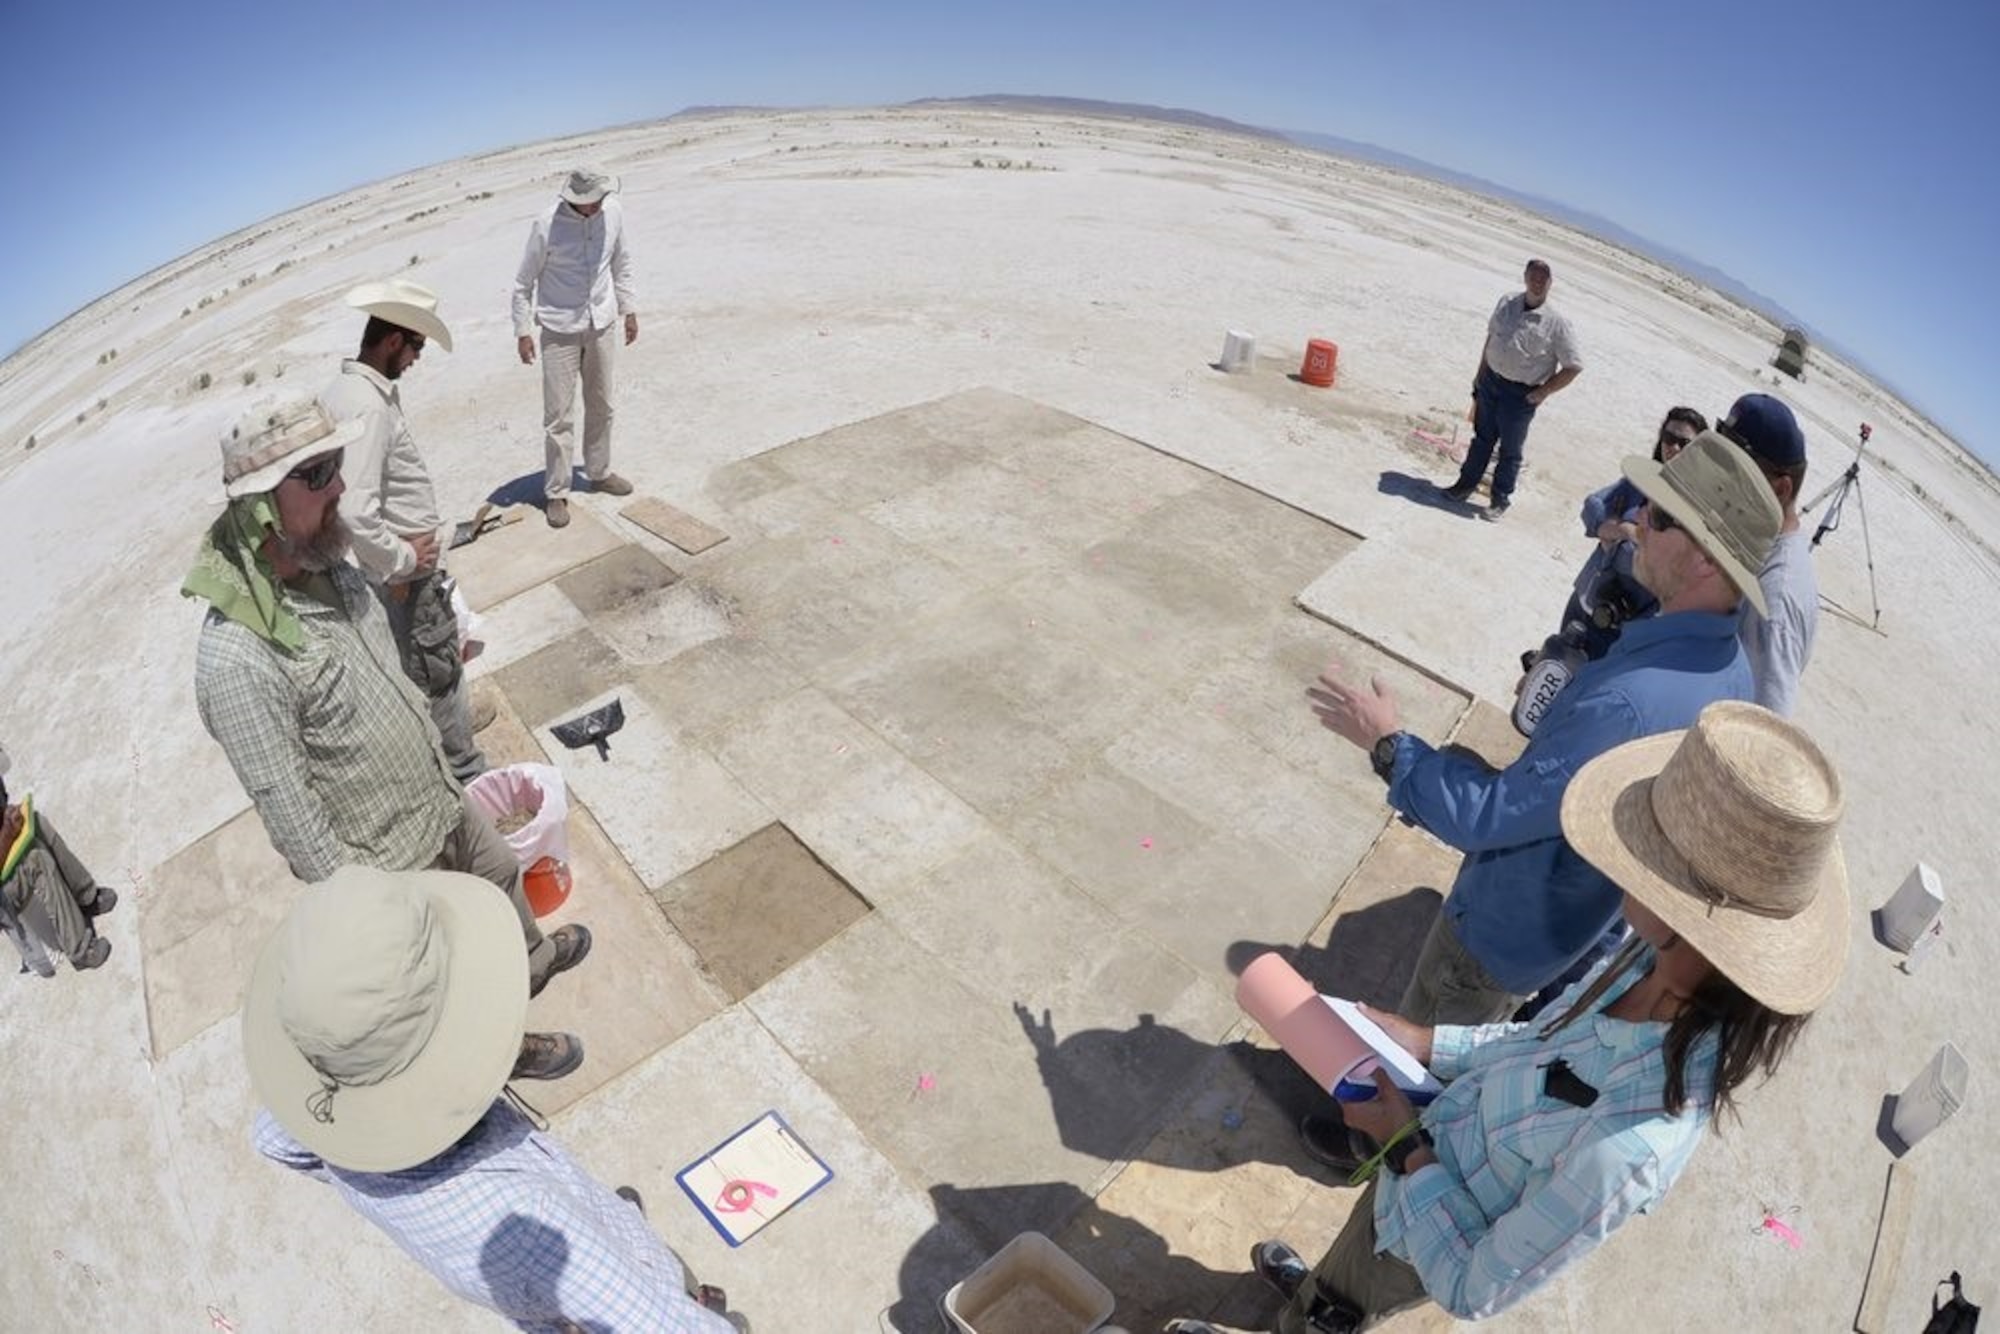 Daron Duke, Far Western Anthropological Research Group project leader, directs a team of archaeologists at a dig site on the Utah Test and Training Range, July 13, 2016.